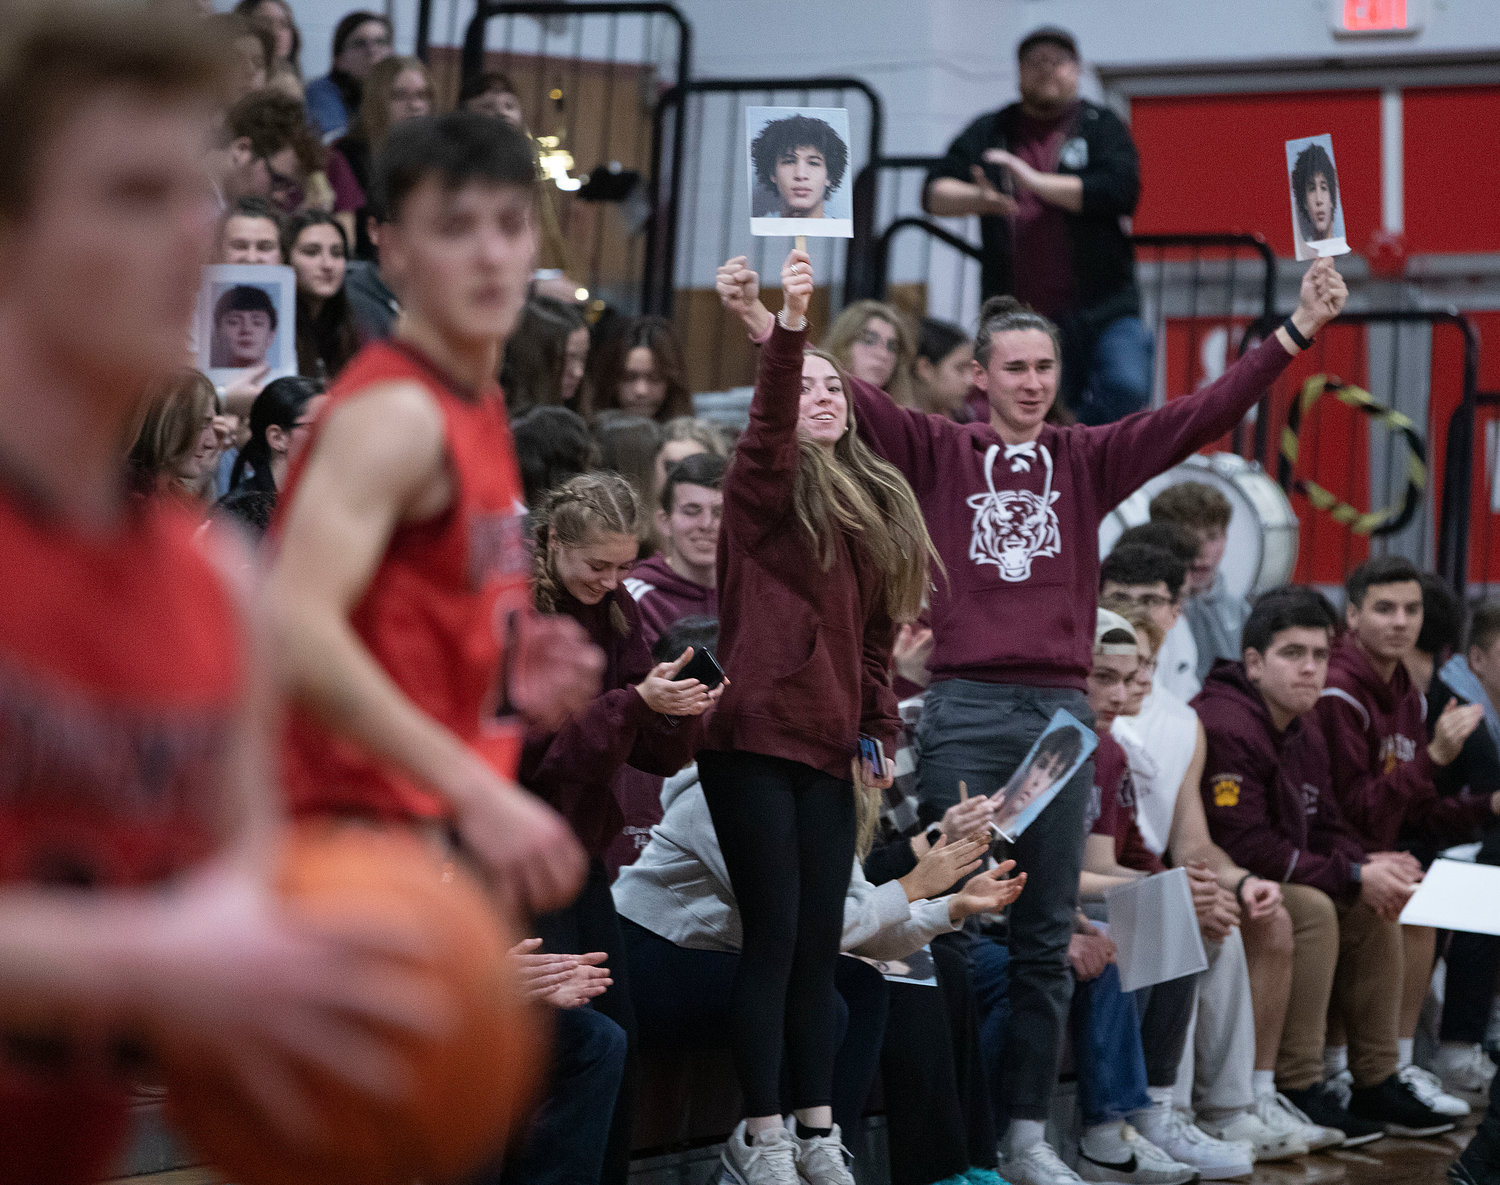 The senior night crowd cheer on senior point guard Tristan White after he drove in for a layup in the second half.